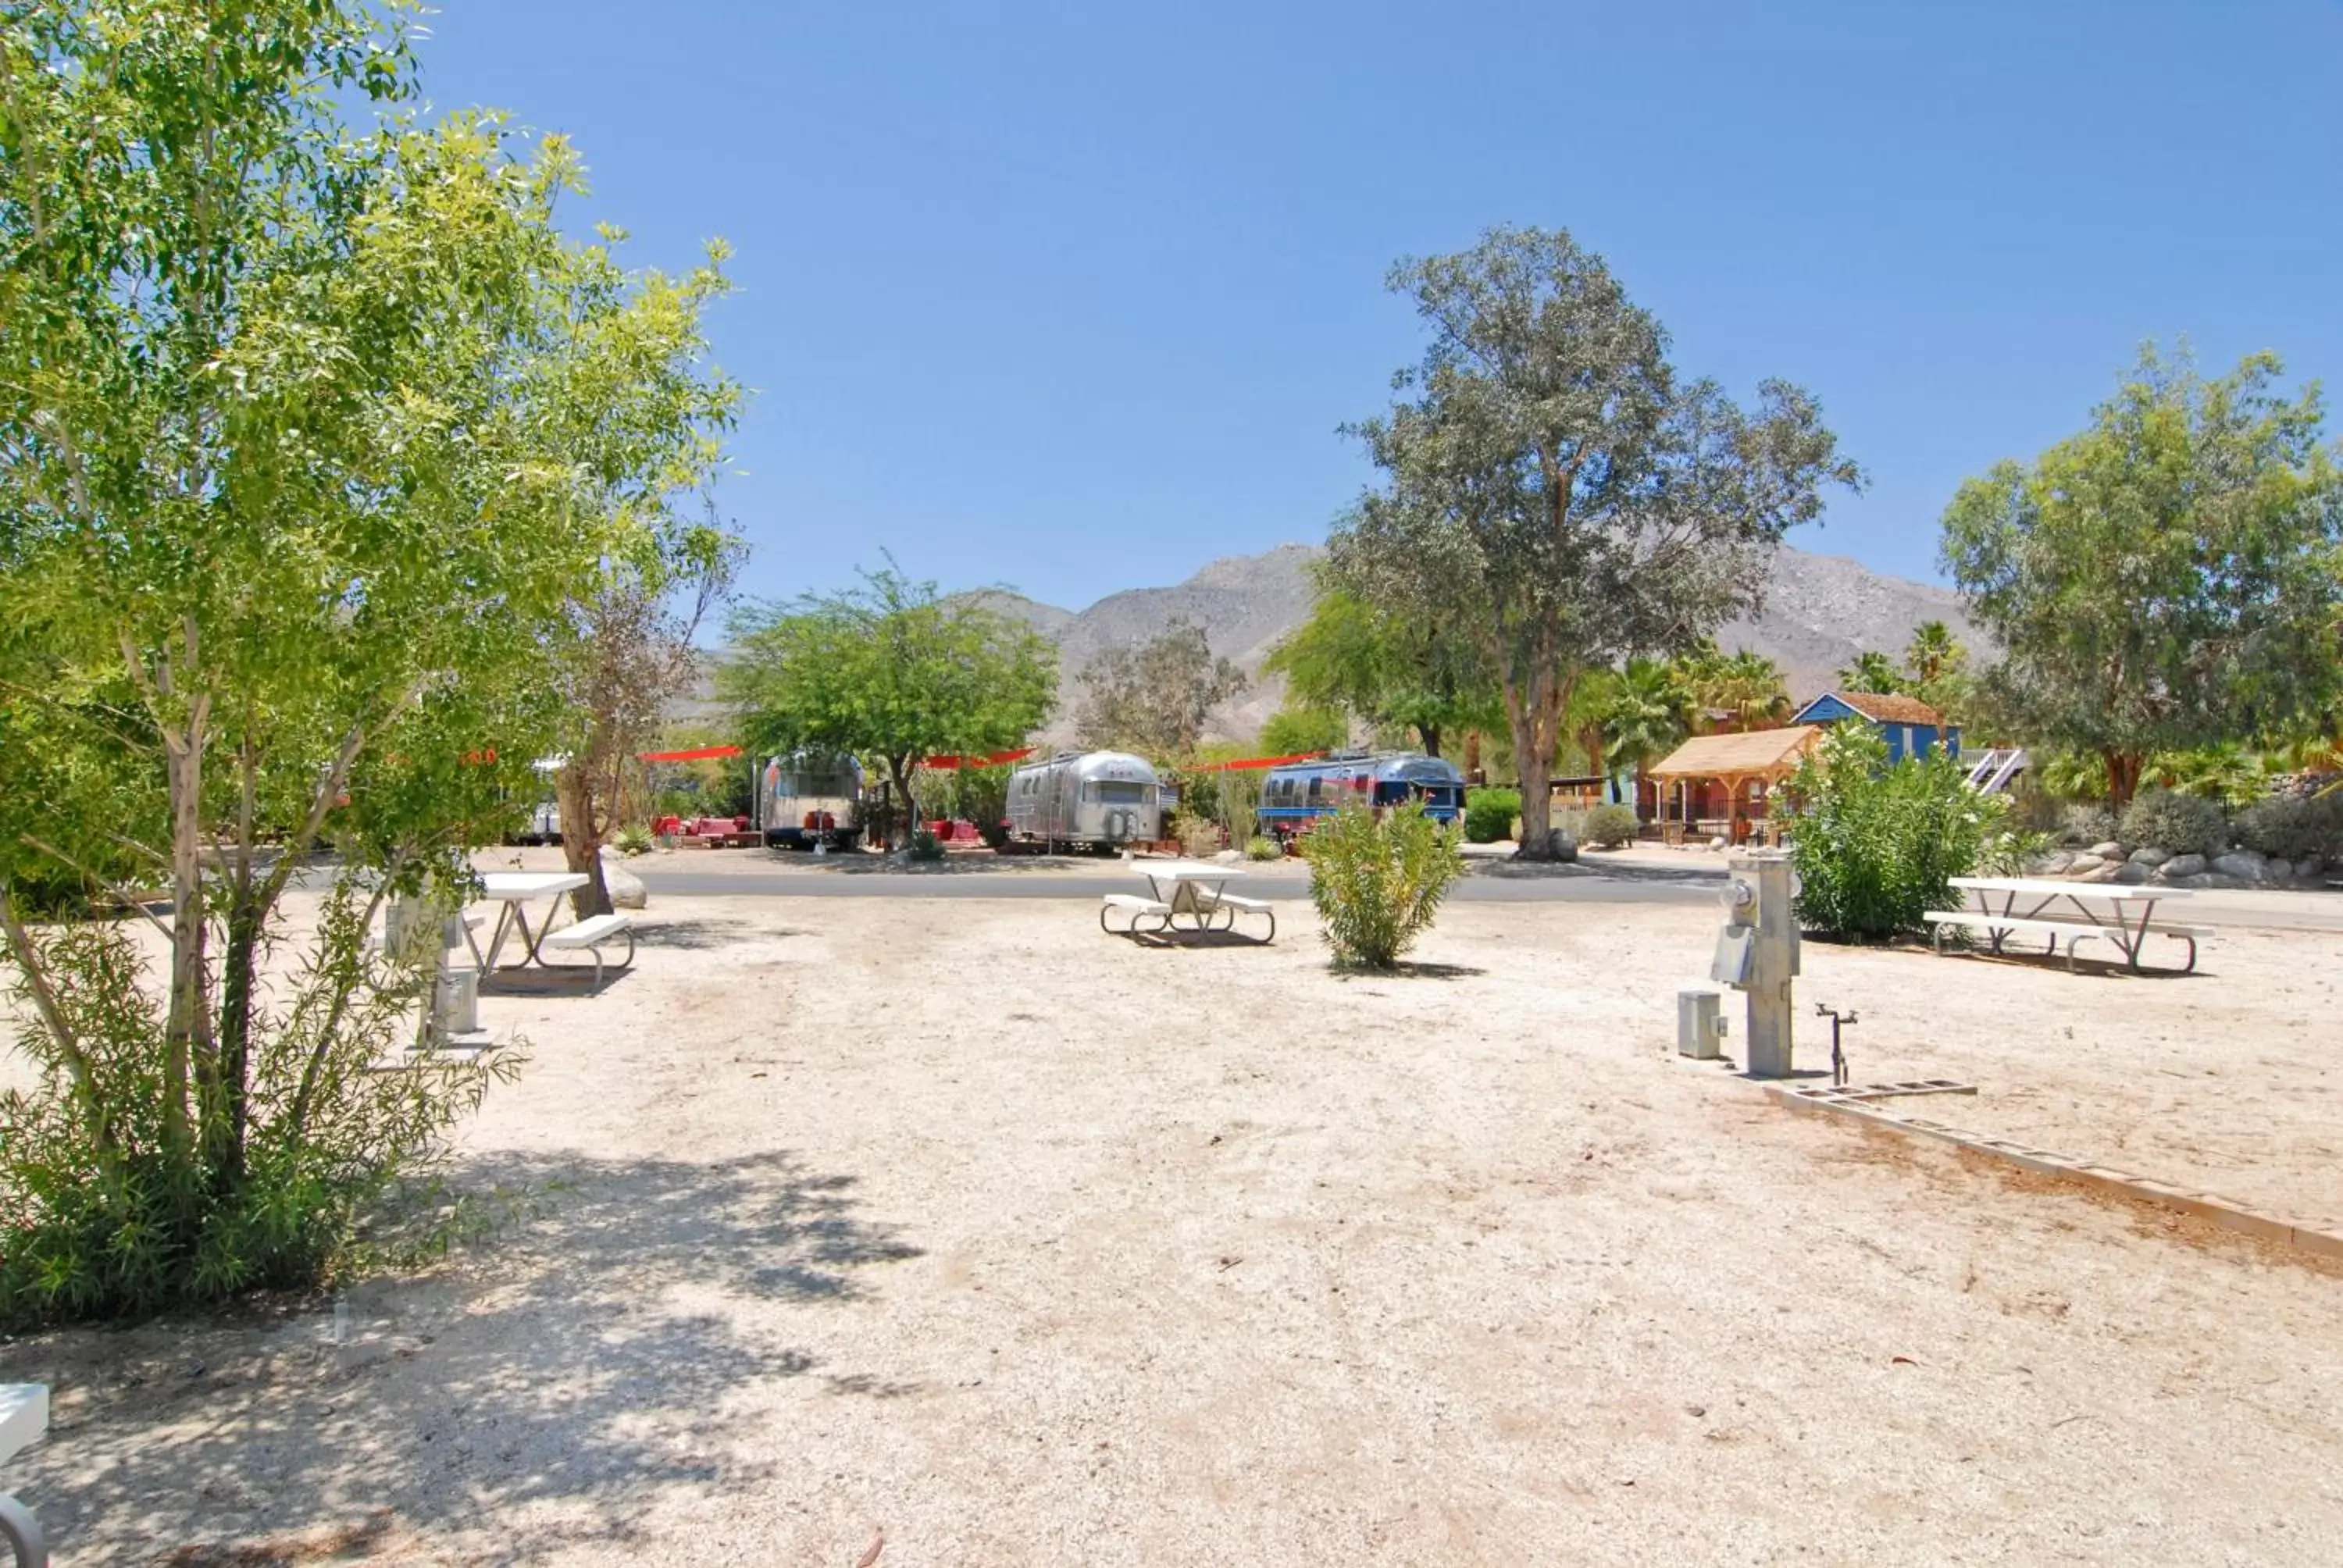 Natural landscape in Palm Canyon Hotel and RV Resort